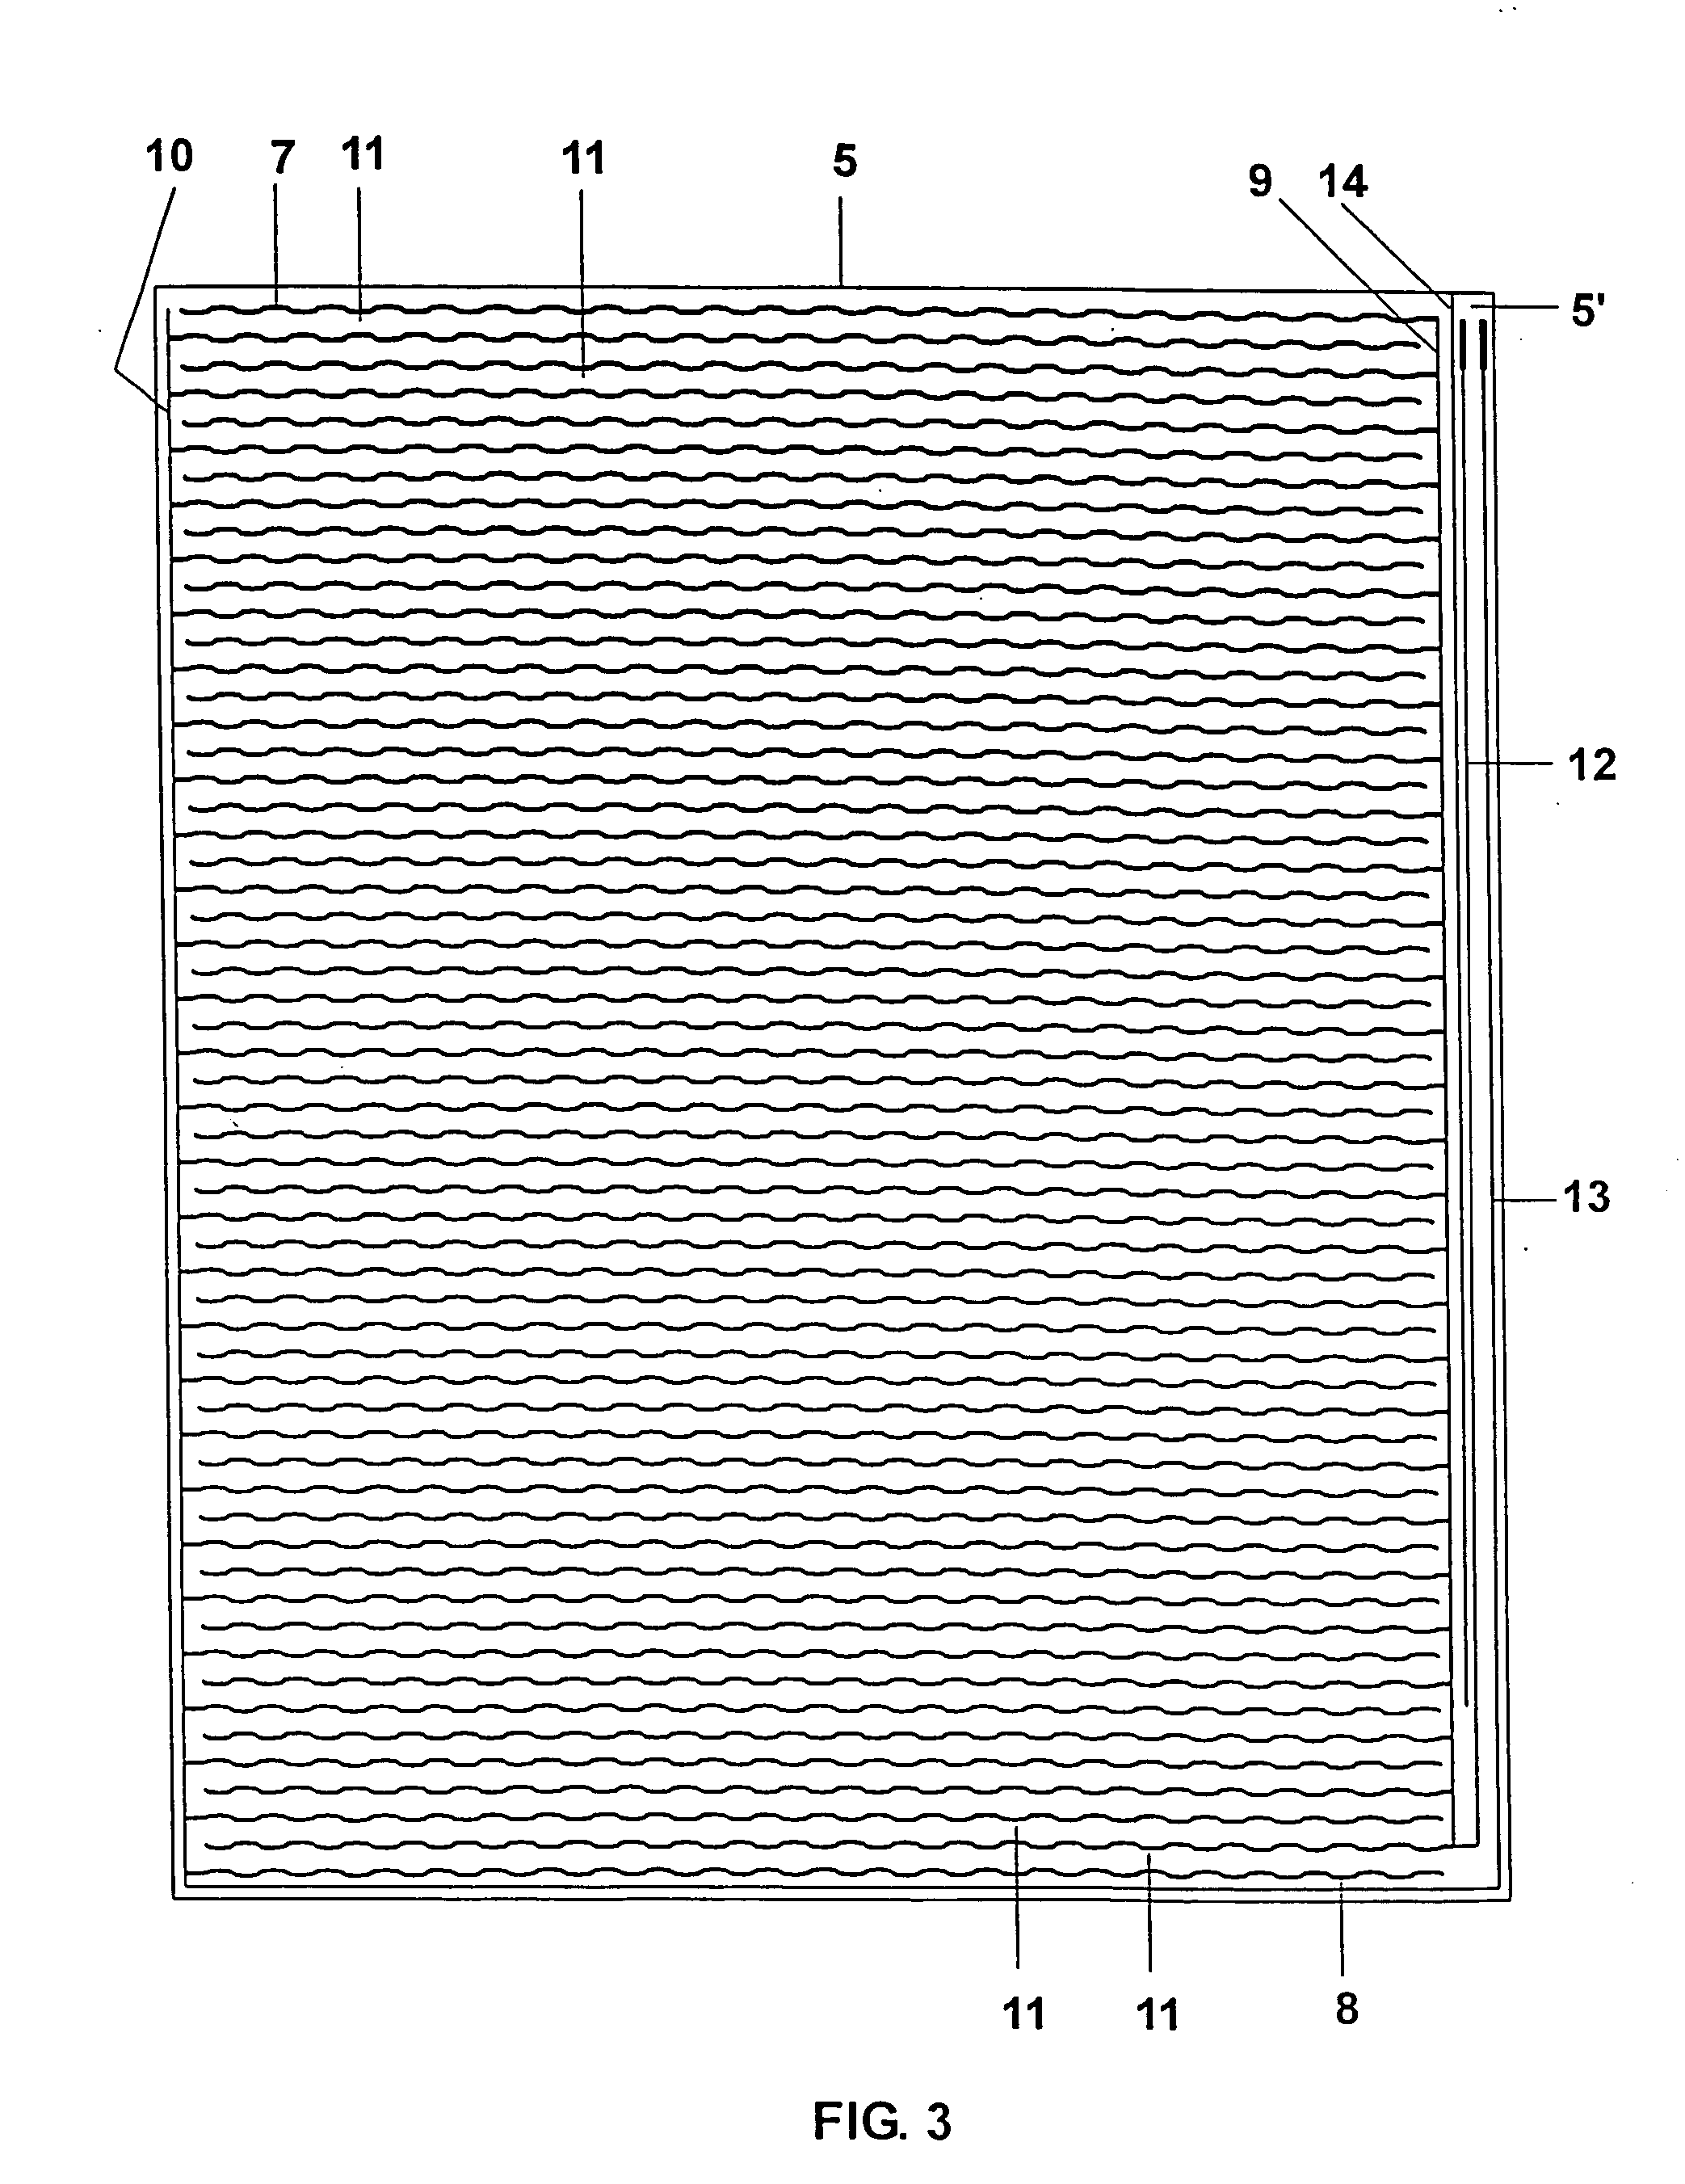 Discharge lamp having at least one external electrode, and process for its production